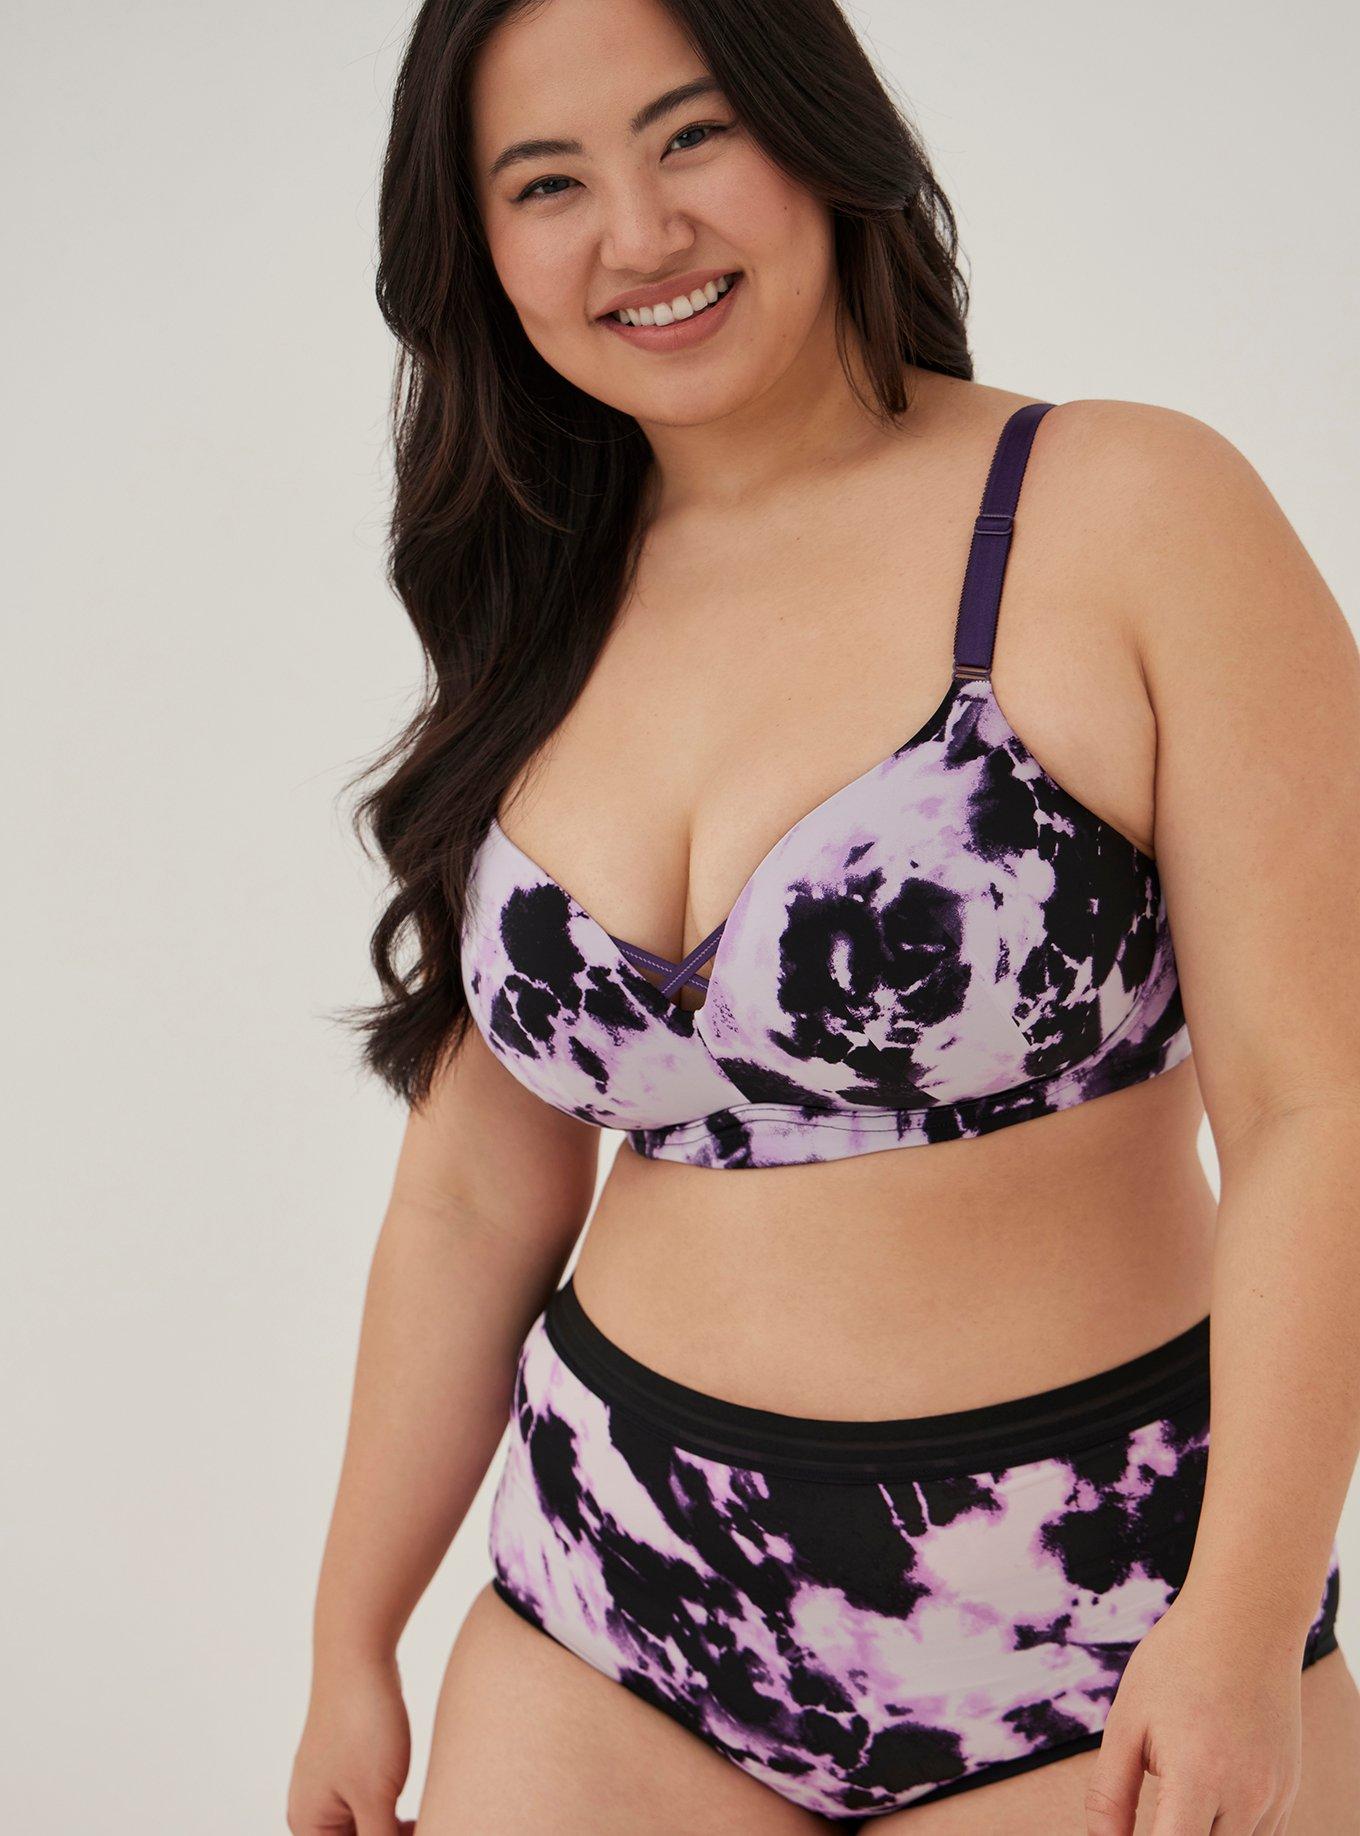 Torrid Bra Push Up Plunge 46D Underwire Maroon Green Floral Adjustable  Straps Size undefined - $21 - From Deana